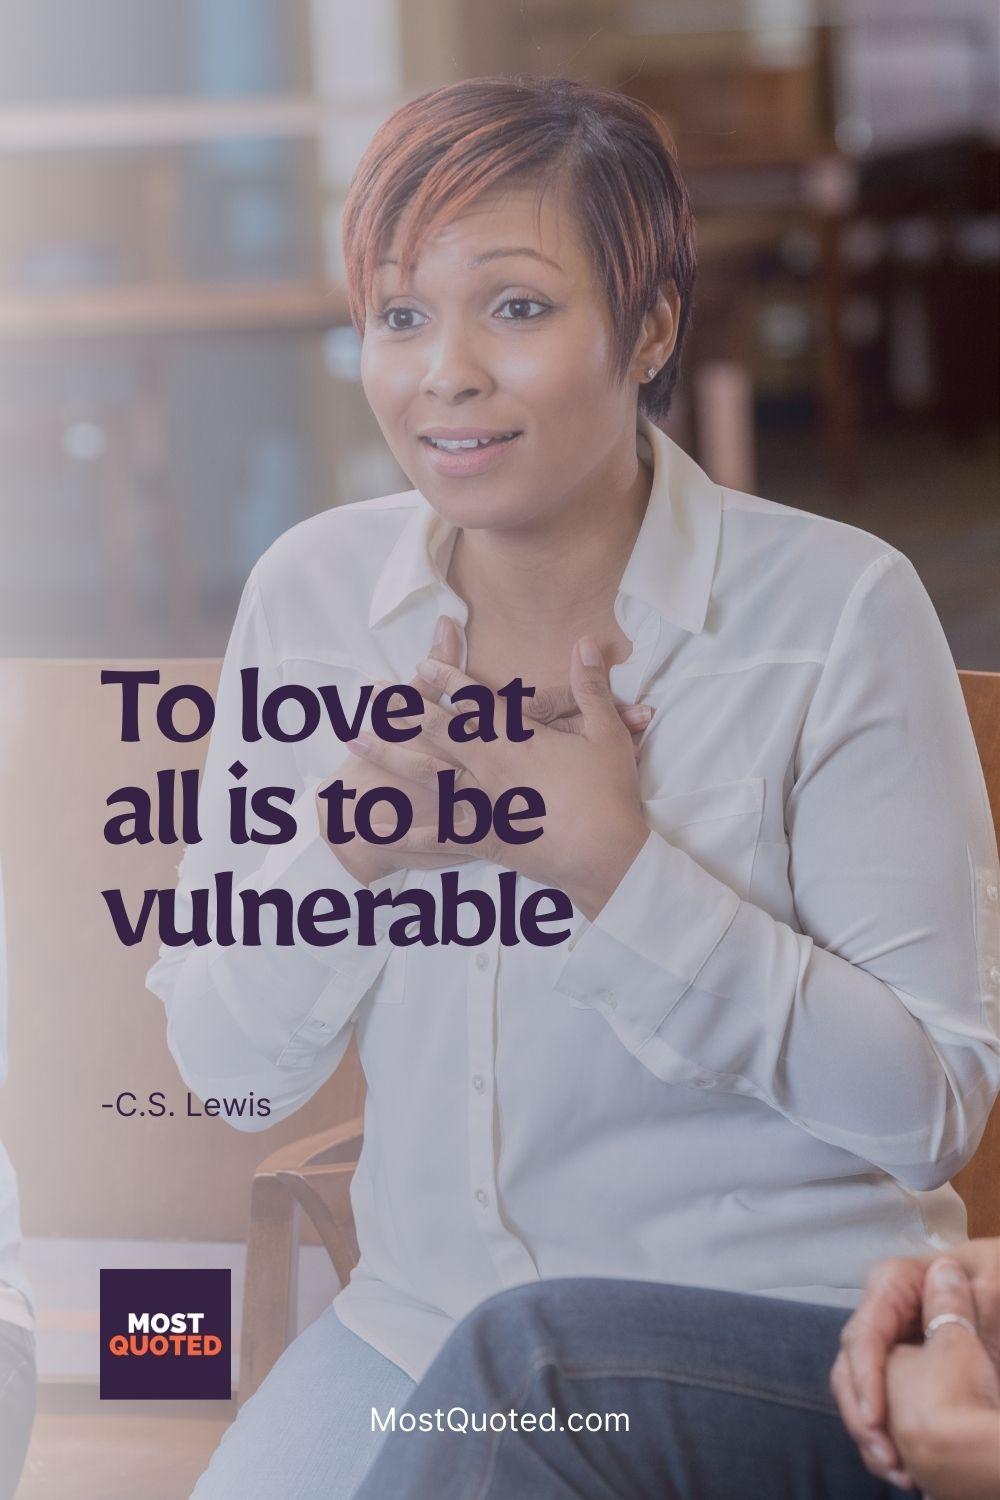 To love at all is to be vulnerable - C.S. Lewis